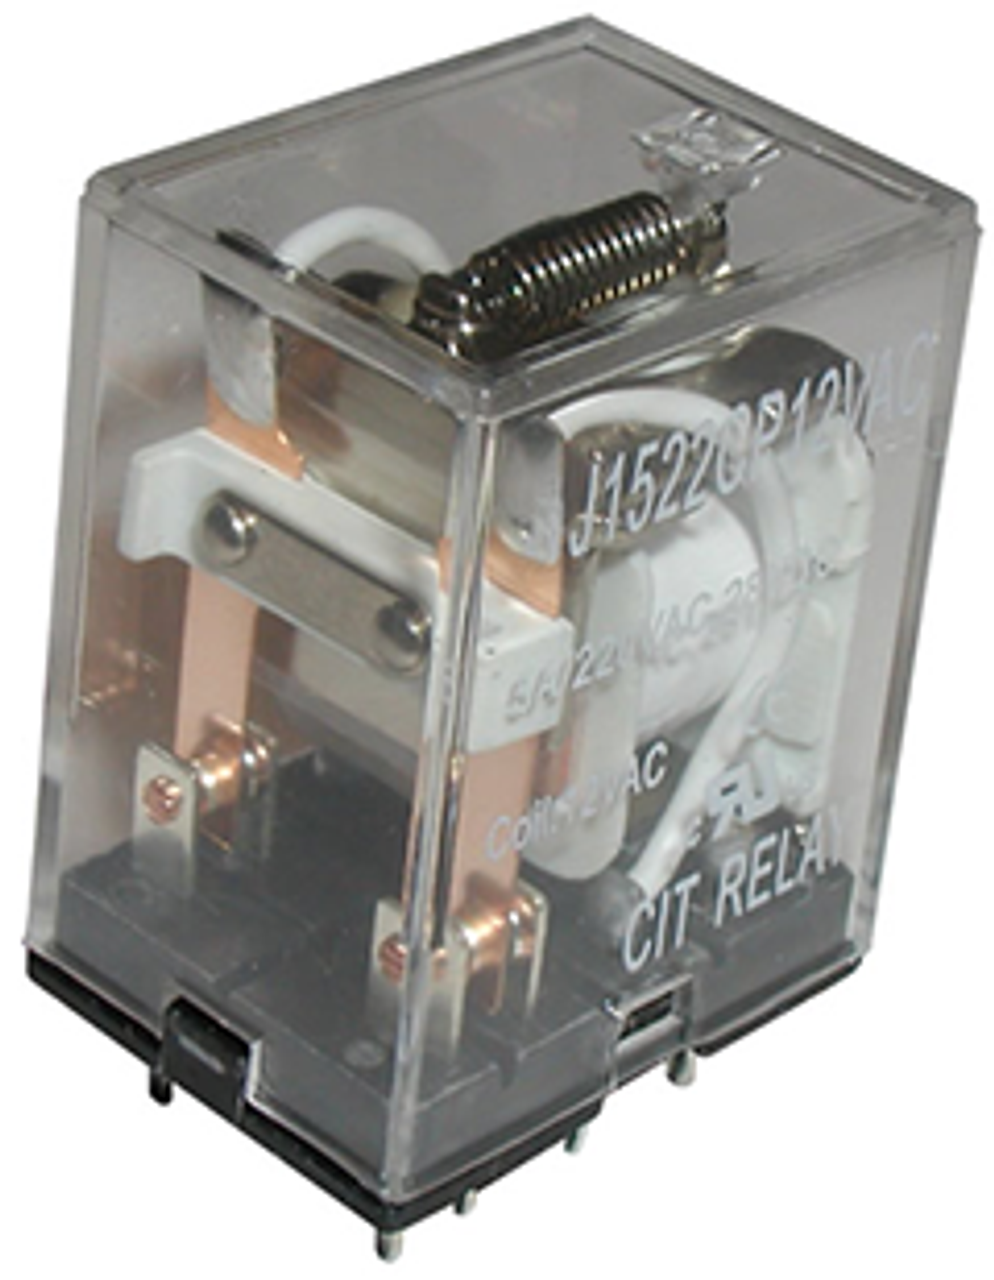 CIT Relay and Switch J1524CT12VAC Industrial Relays